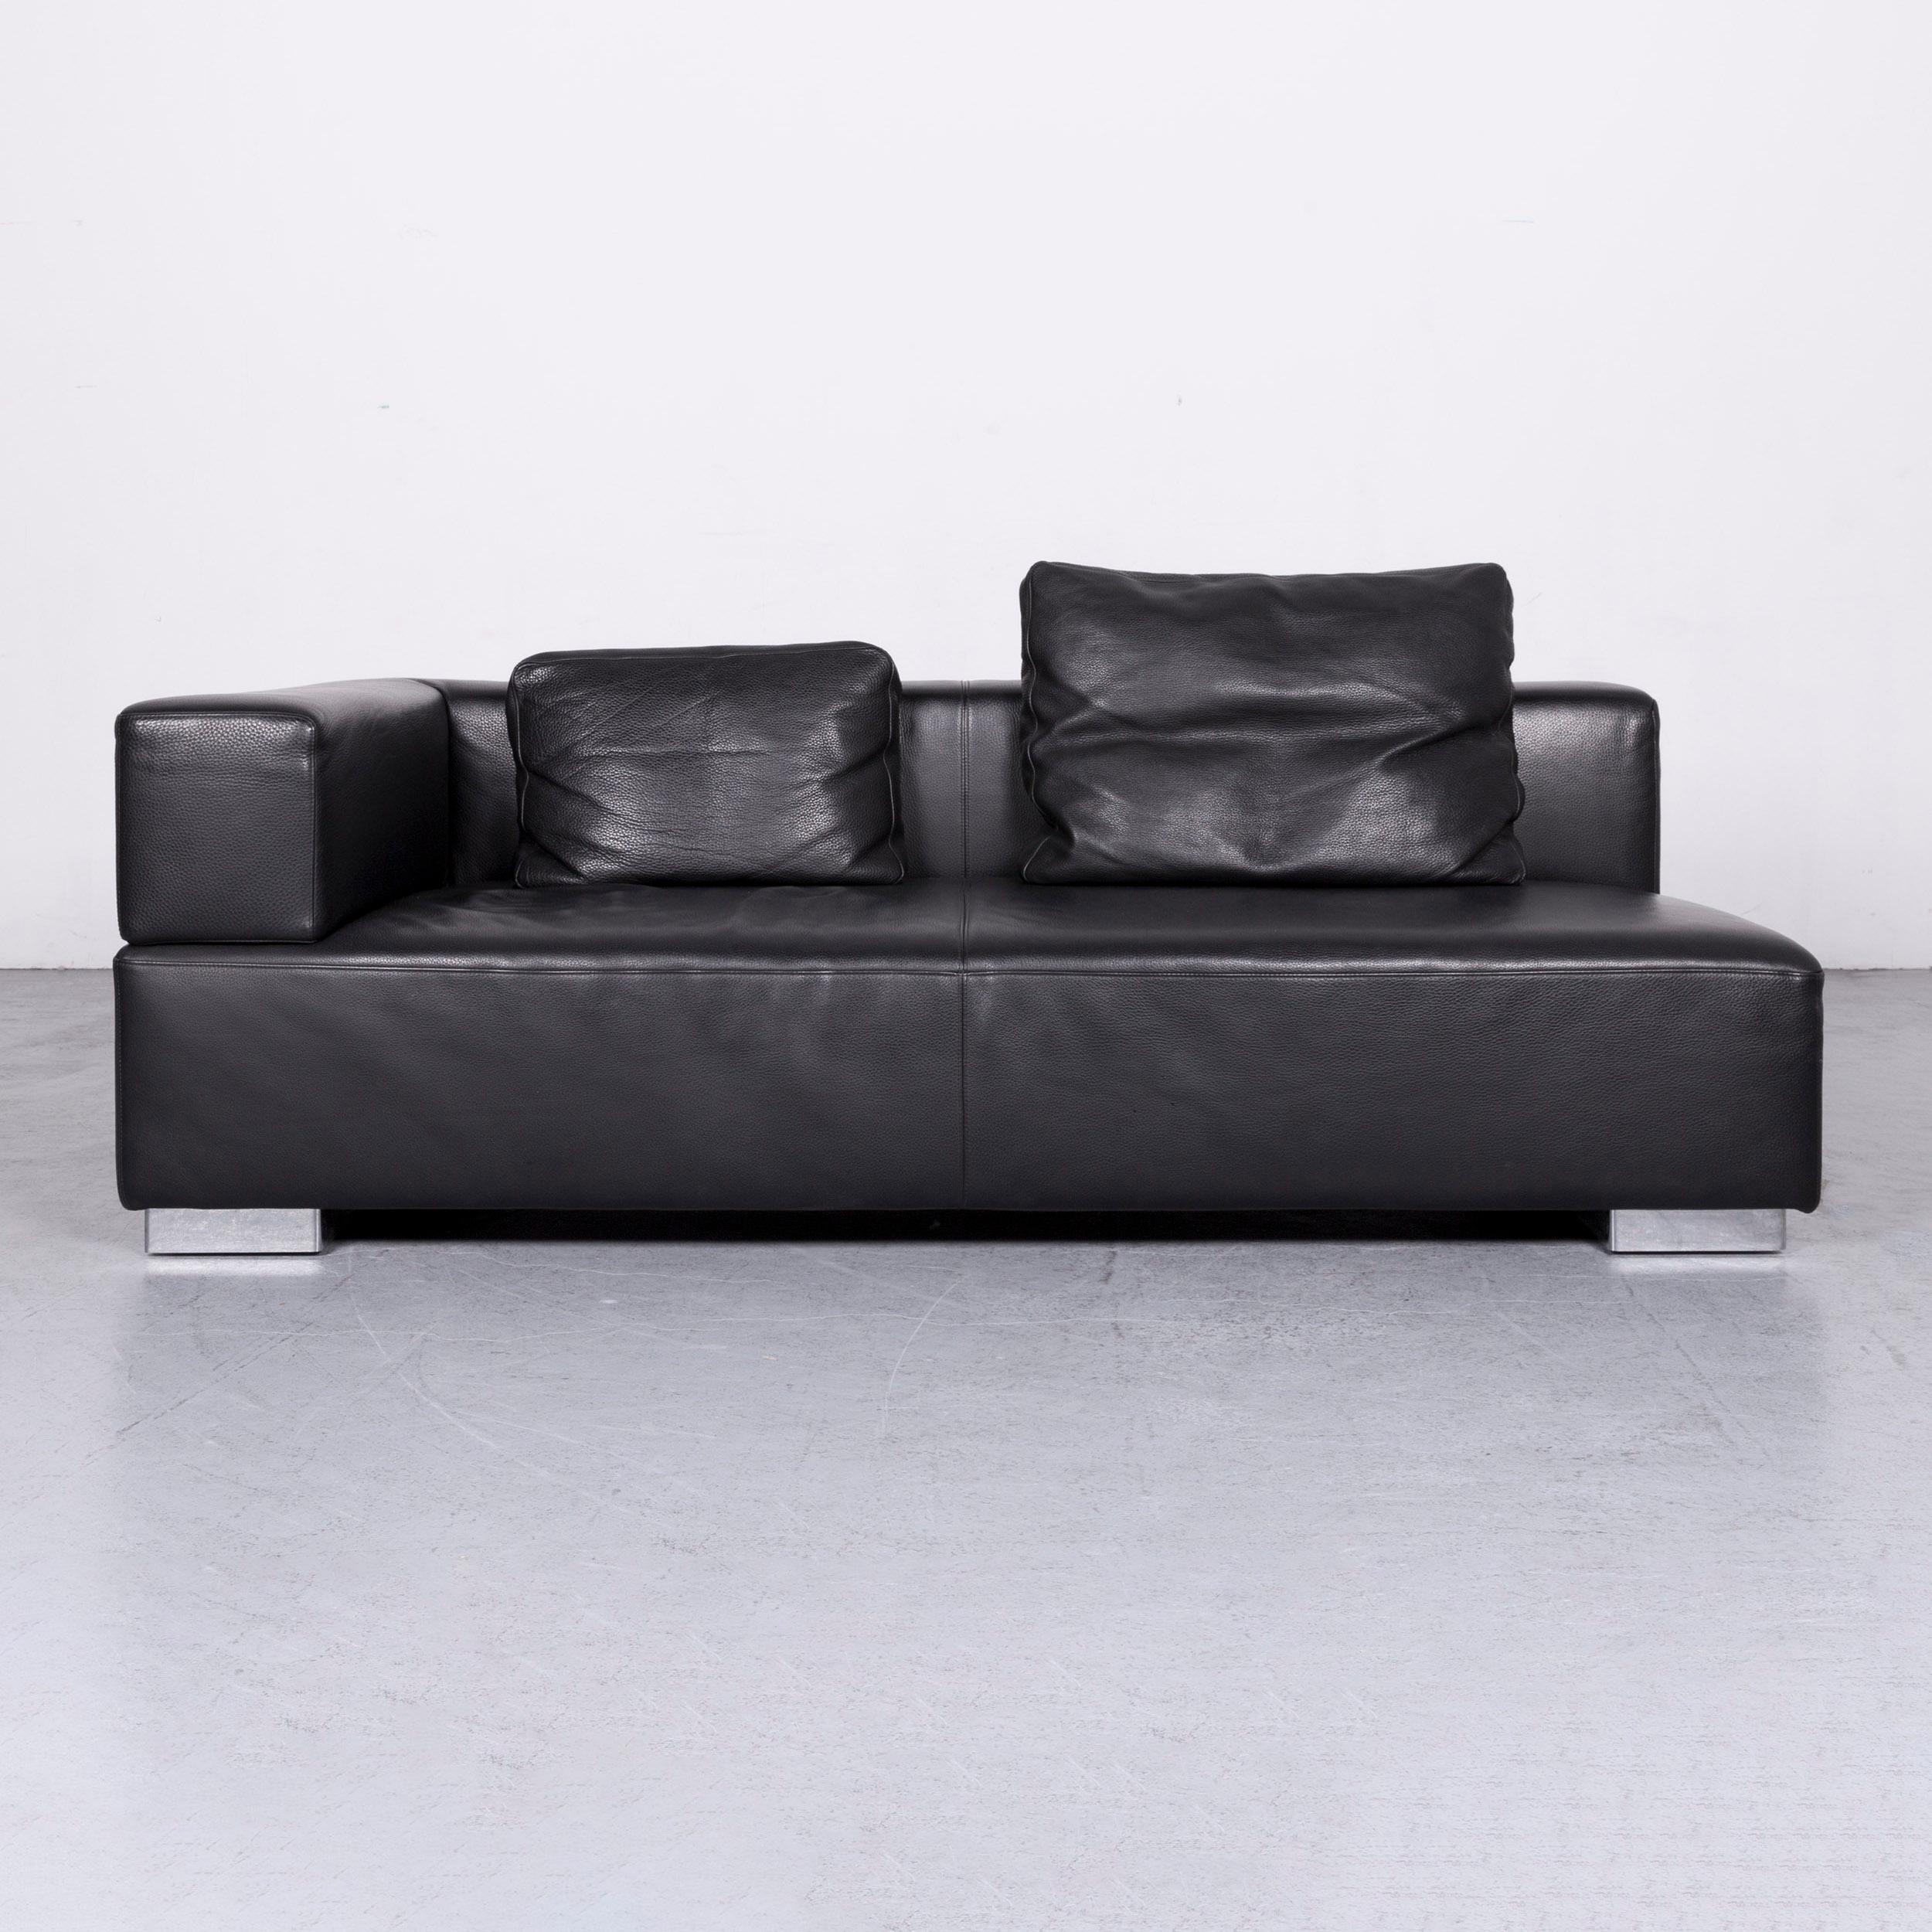 We bring to you a Brühl & Sippold designer sofa Recamiere leather black two-seat couch modern.